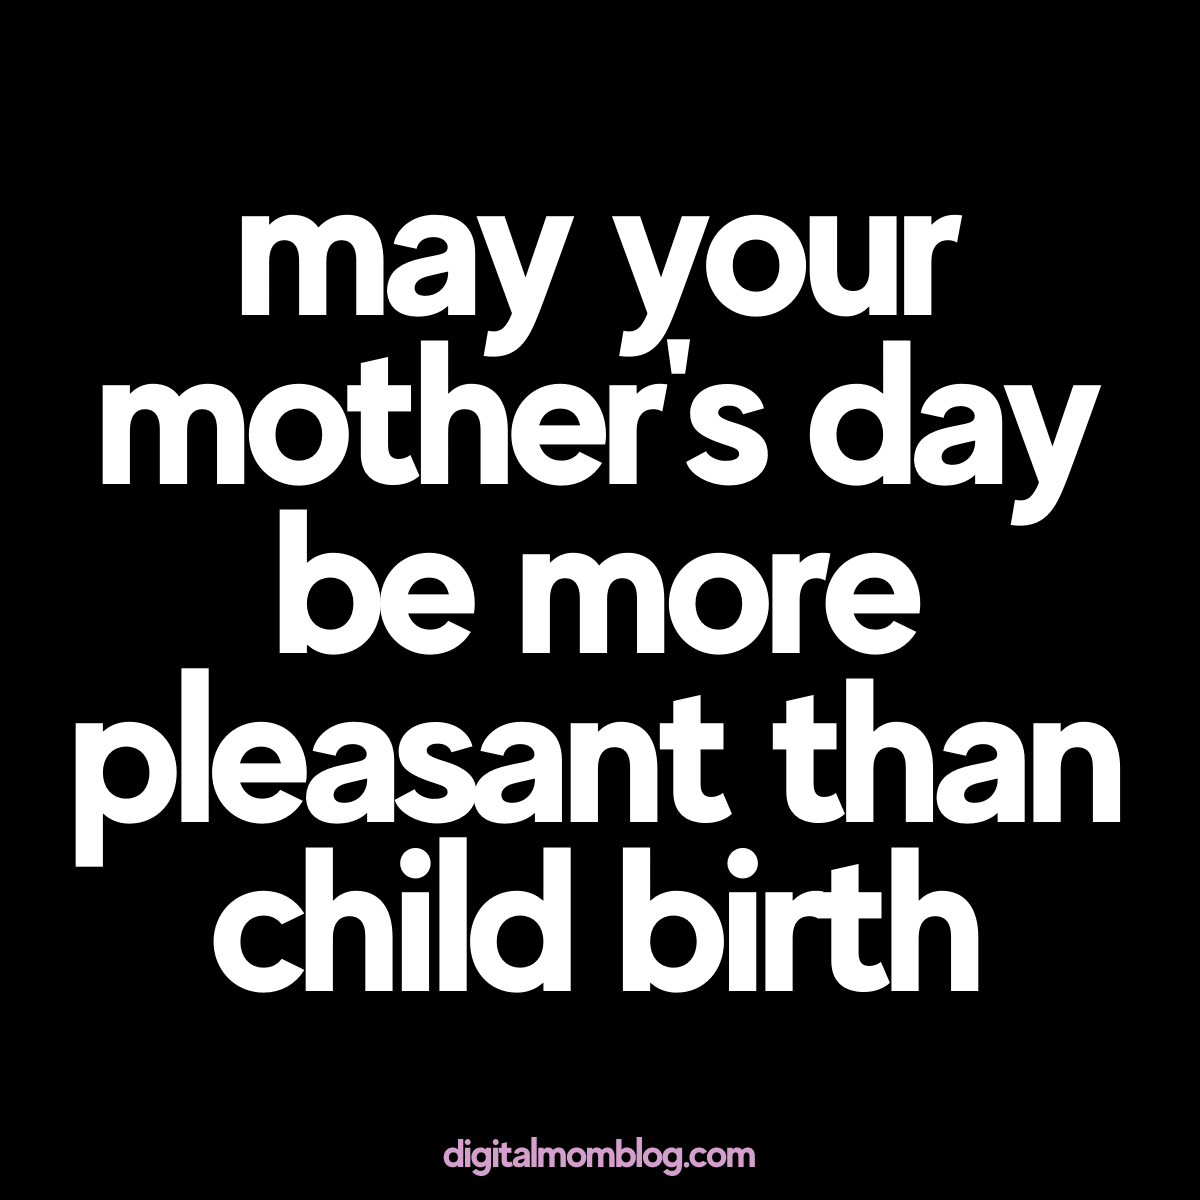 mothers day memes mom. May your mother's day be more pleasant than child birth.